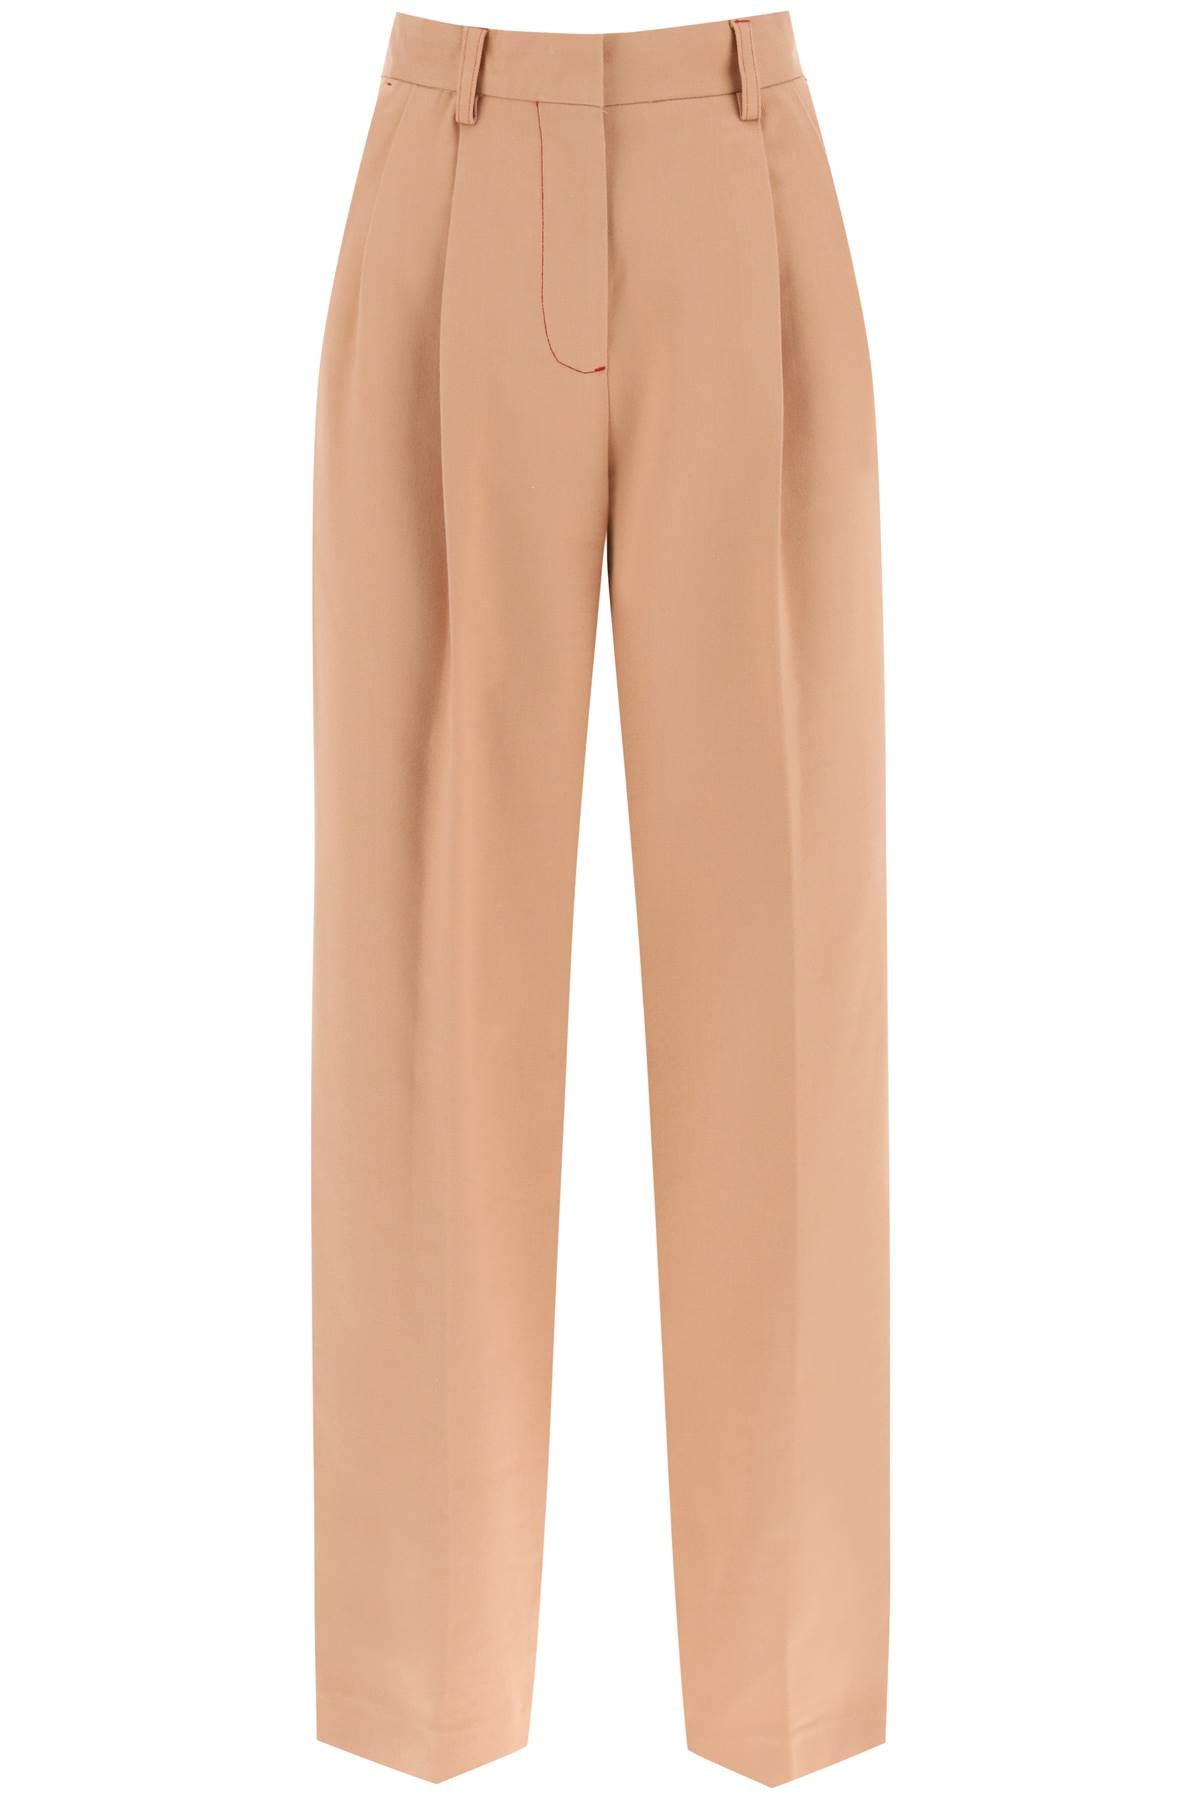 See By Chloe See by chloe cotton twill pants